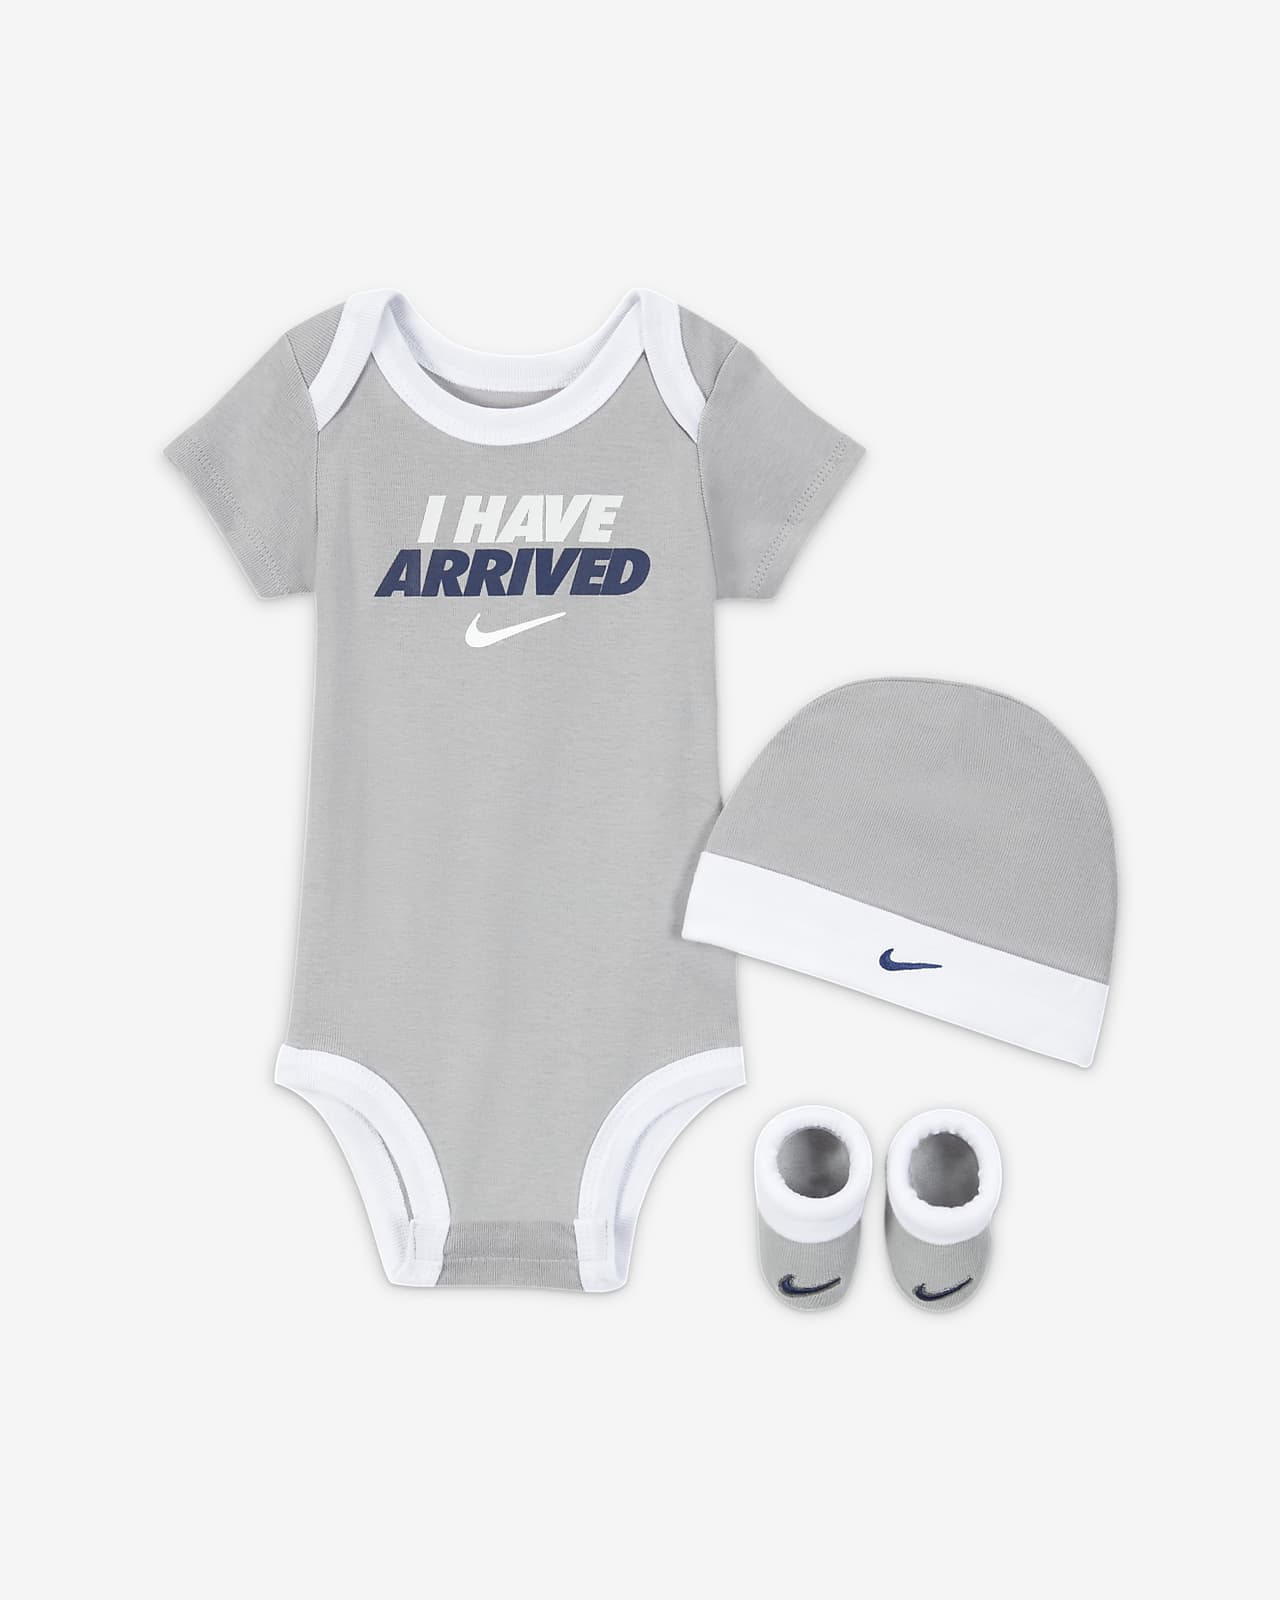 https://static.nike.com/a/images/t_PDP_1280_v1/f_auto,q_auto:eco/3766aa93-619d-4d43-9498-1dae1f3d2b32/baby-3-piece-box-set-Mk9tlH.png